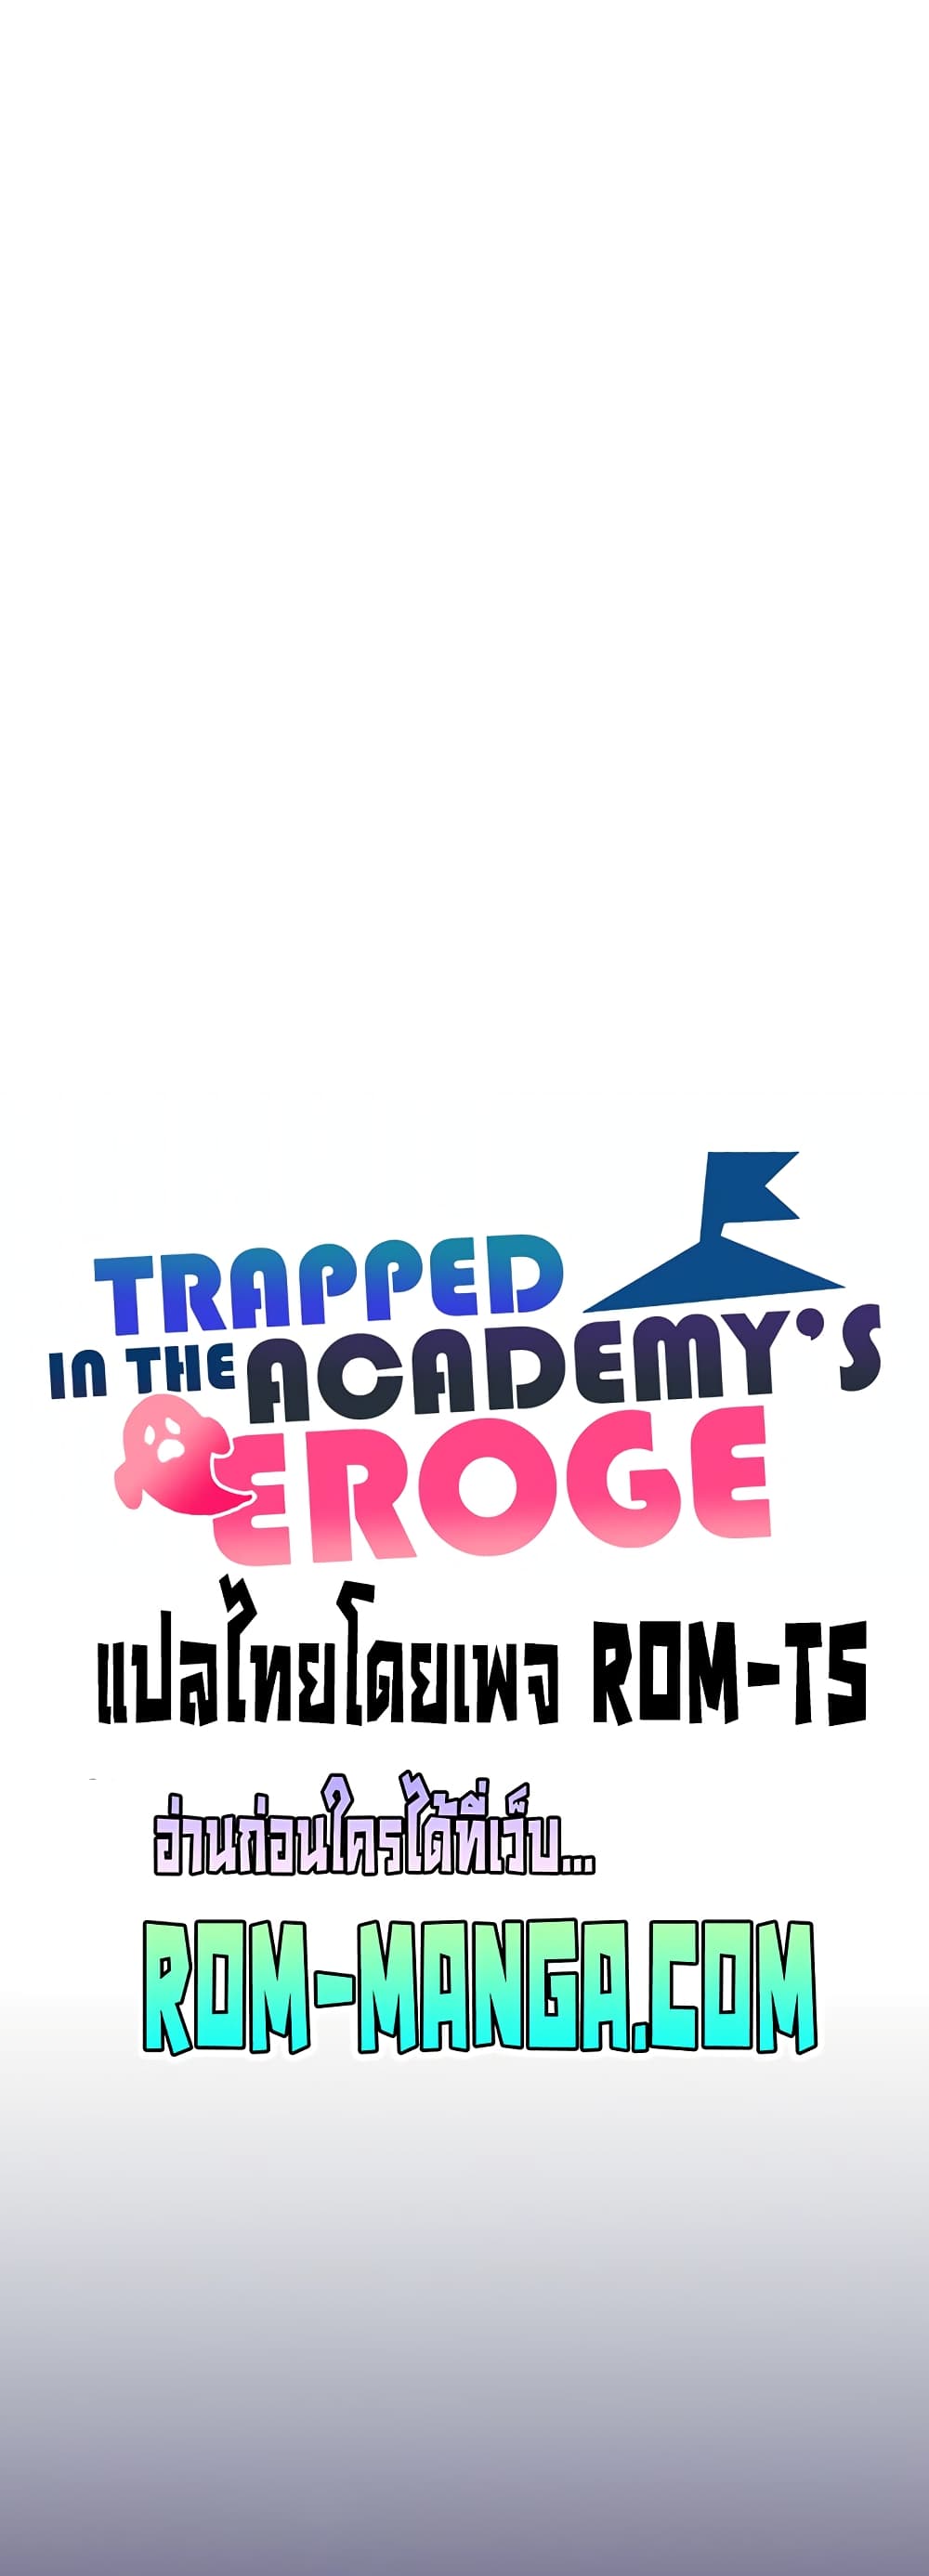 Trapped in the Academy’s Eroge 29-29